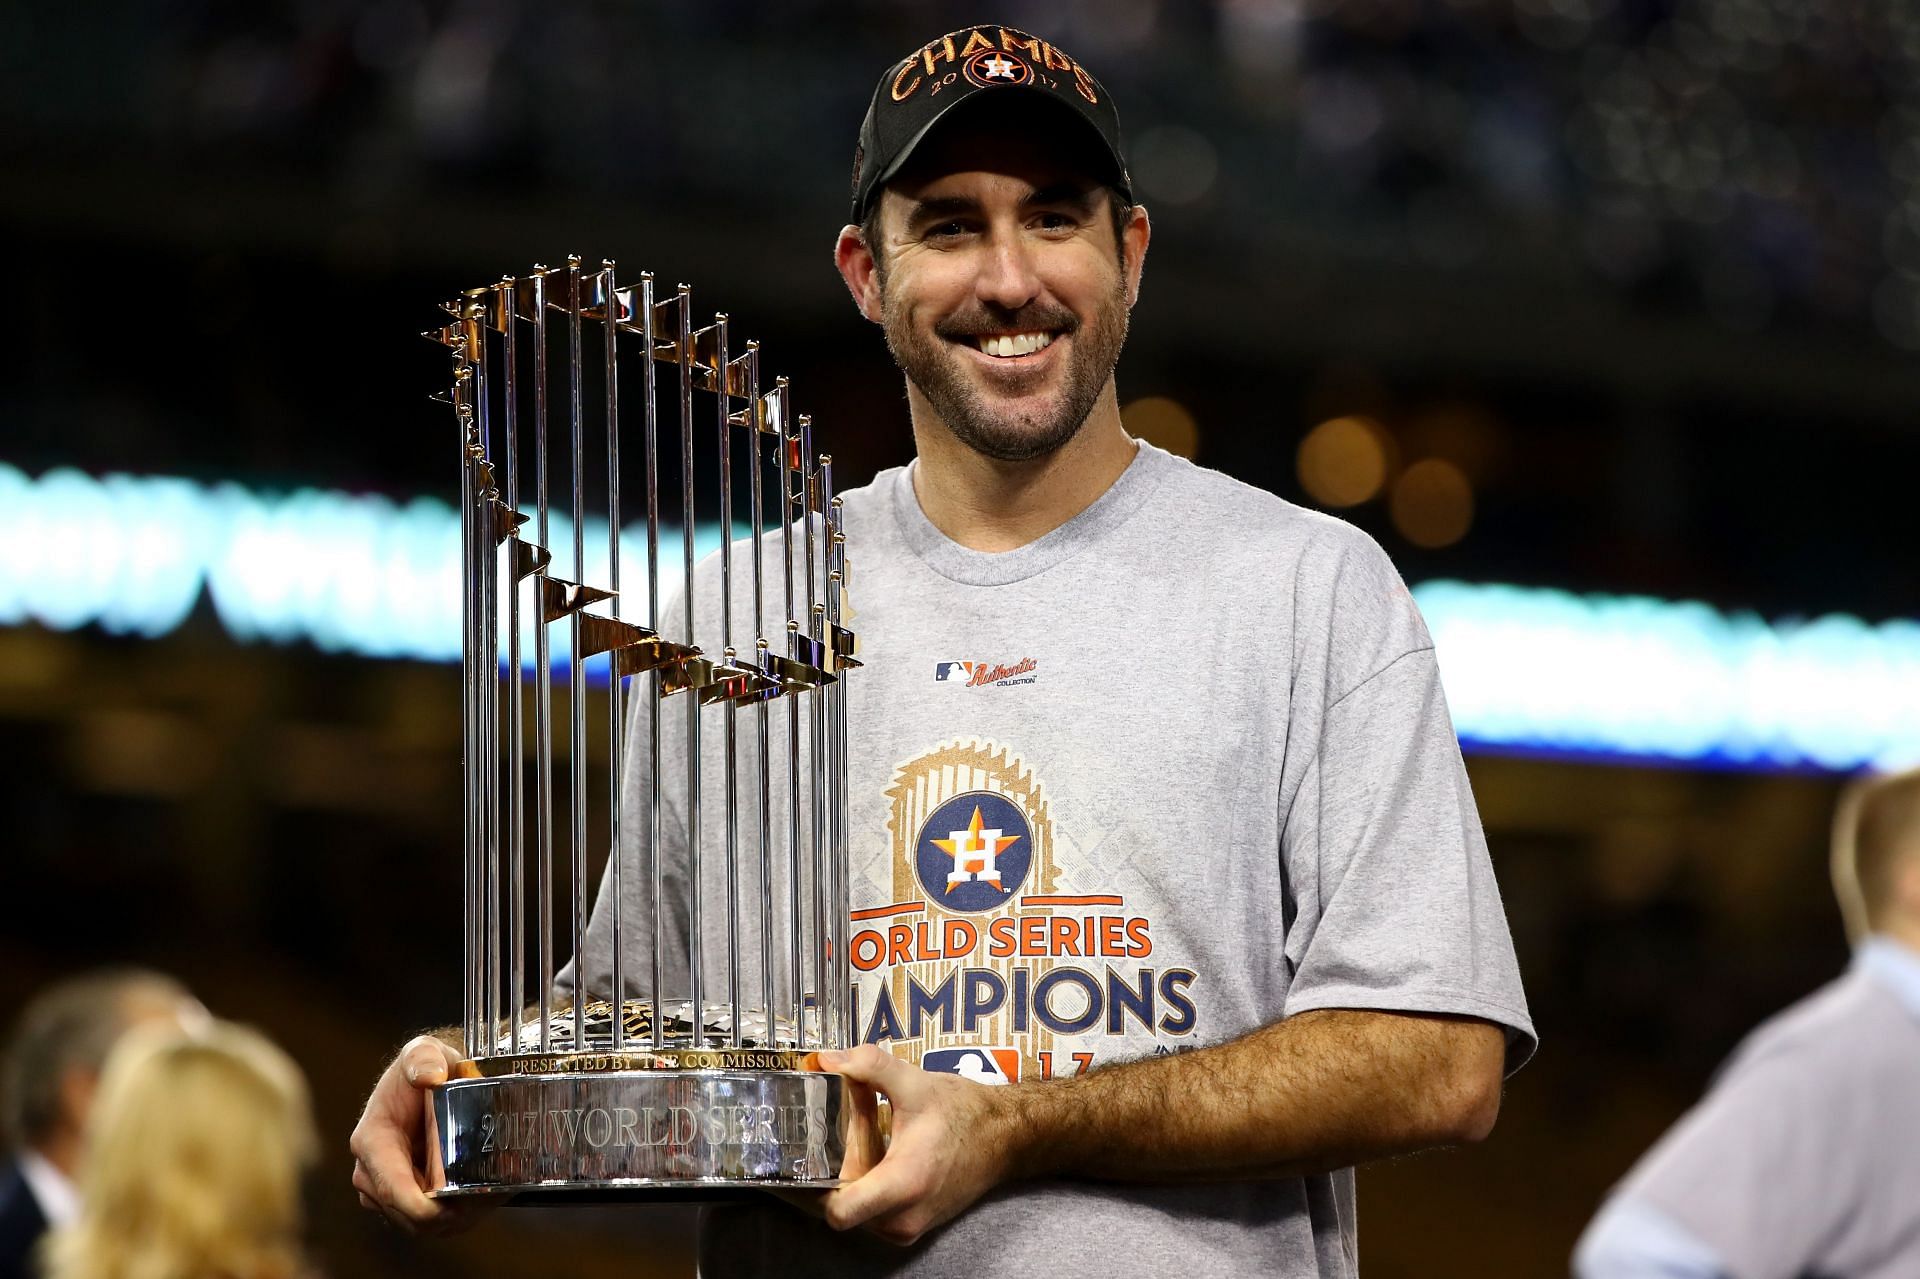 Justin Verlander agrees to $86M deal with Mets, reports say